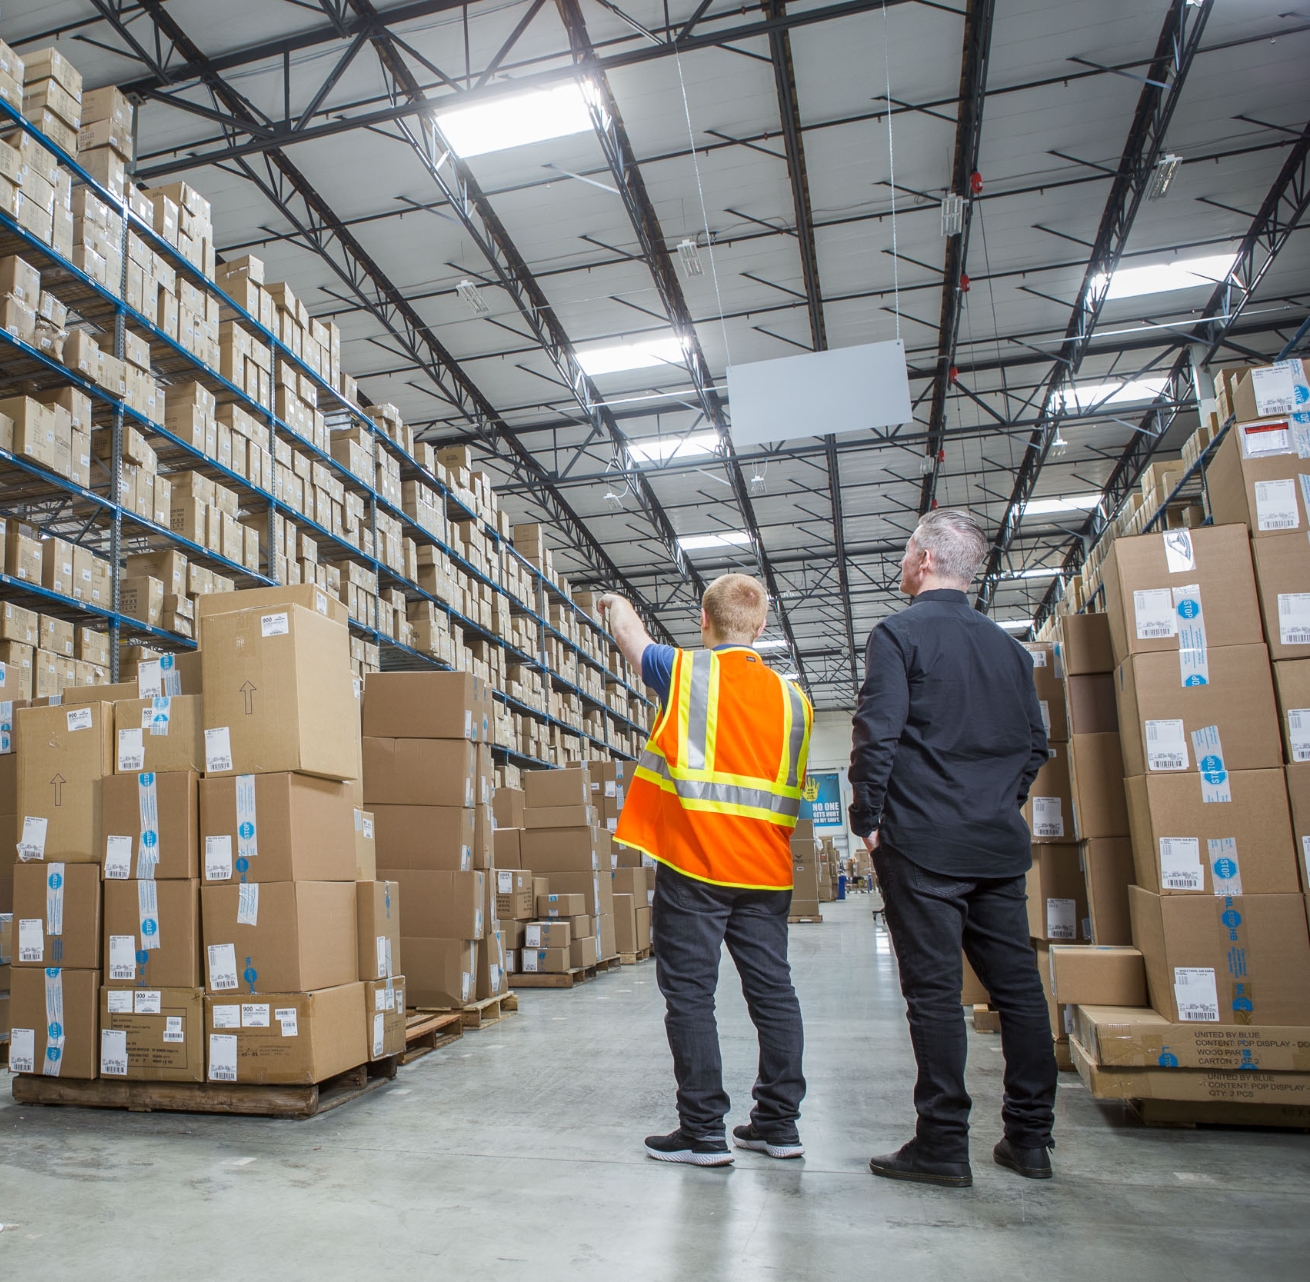 Man in hi-vis vest pointing to boxes while man in black shirt looks in warehouse